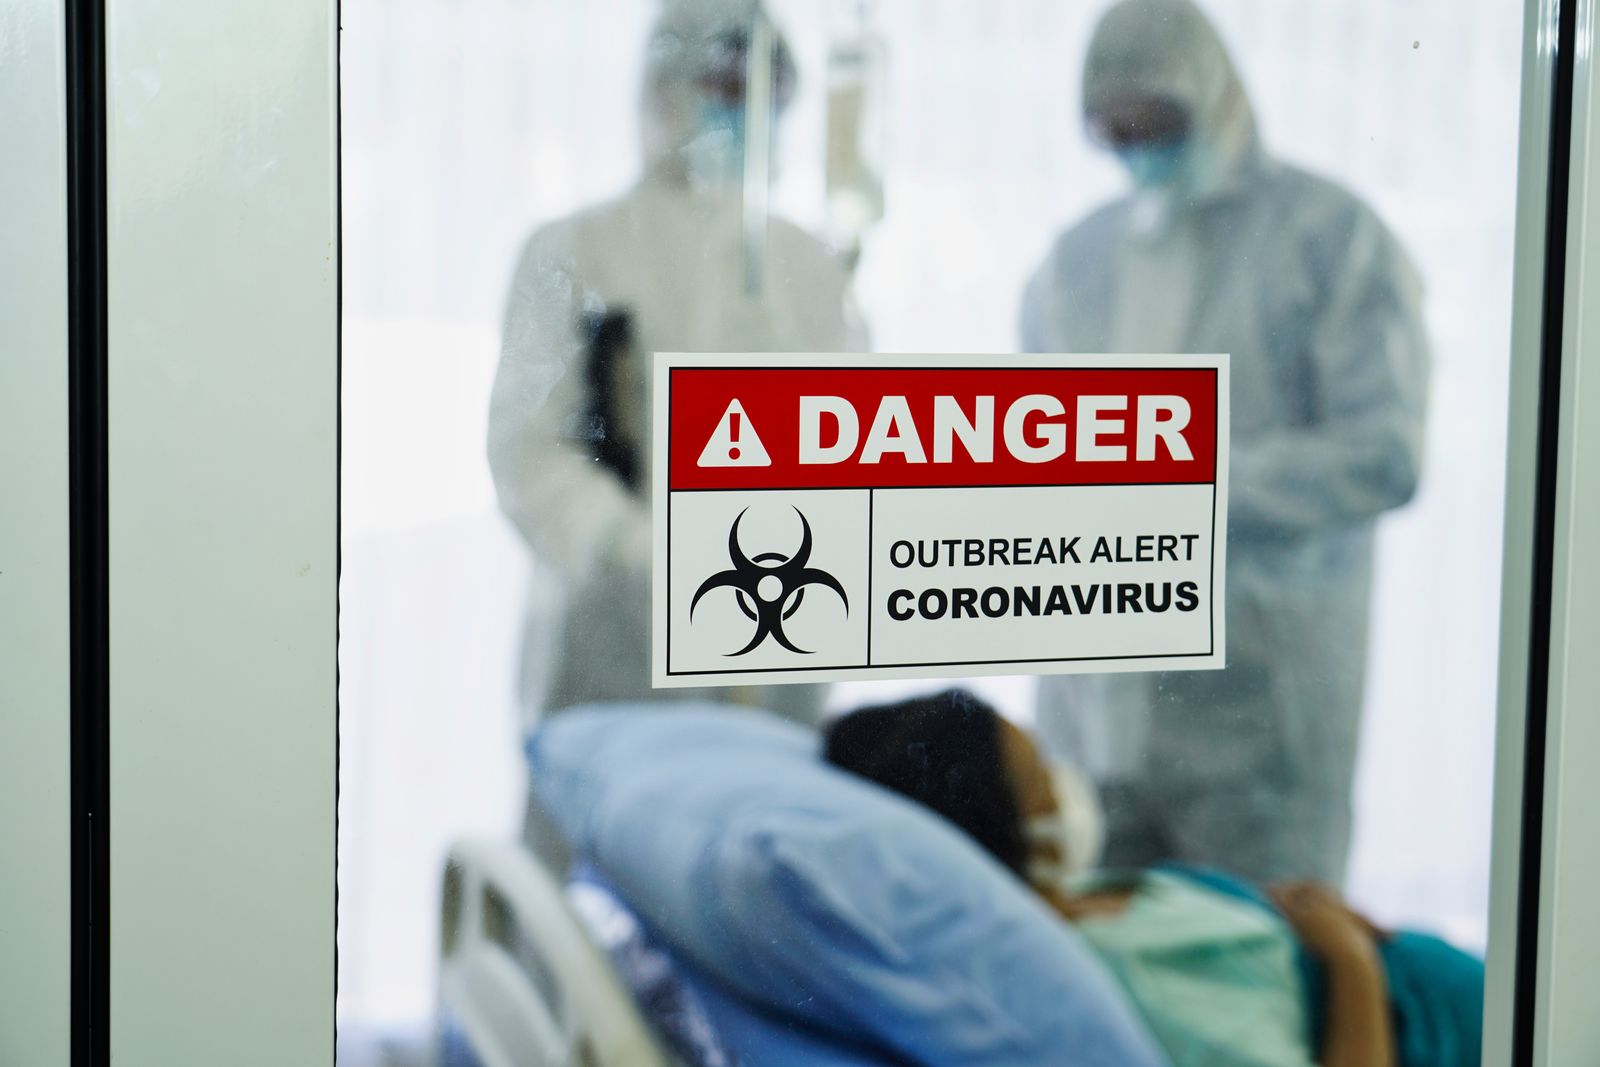 A coronavirus danger sign in front of a control area with a team of doctors in protective gear attending to an infected patient in a quarantined room | Photo: Shutterstock/Kobkit Chamchod